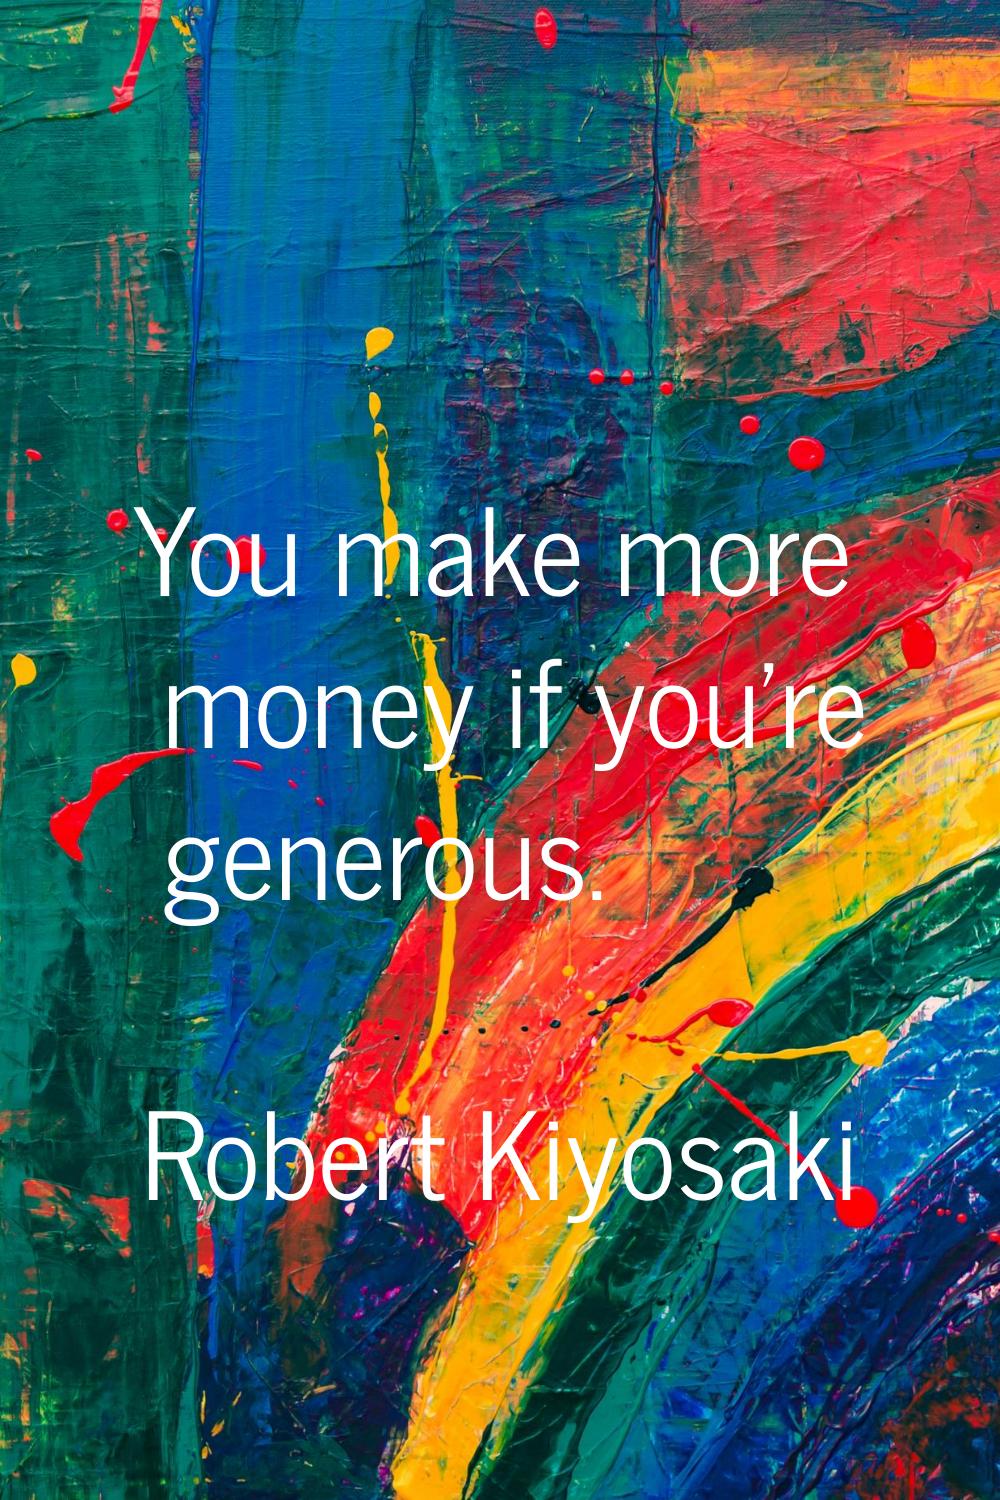 You make more money if you're generous.